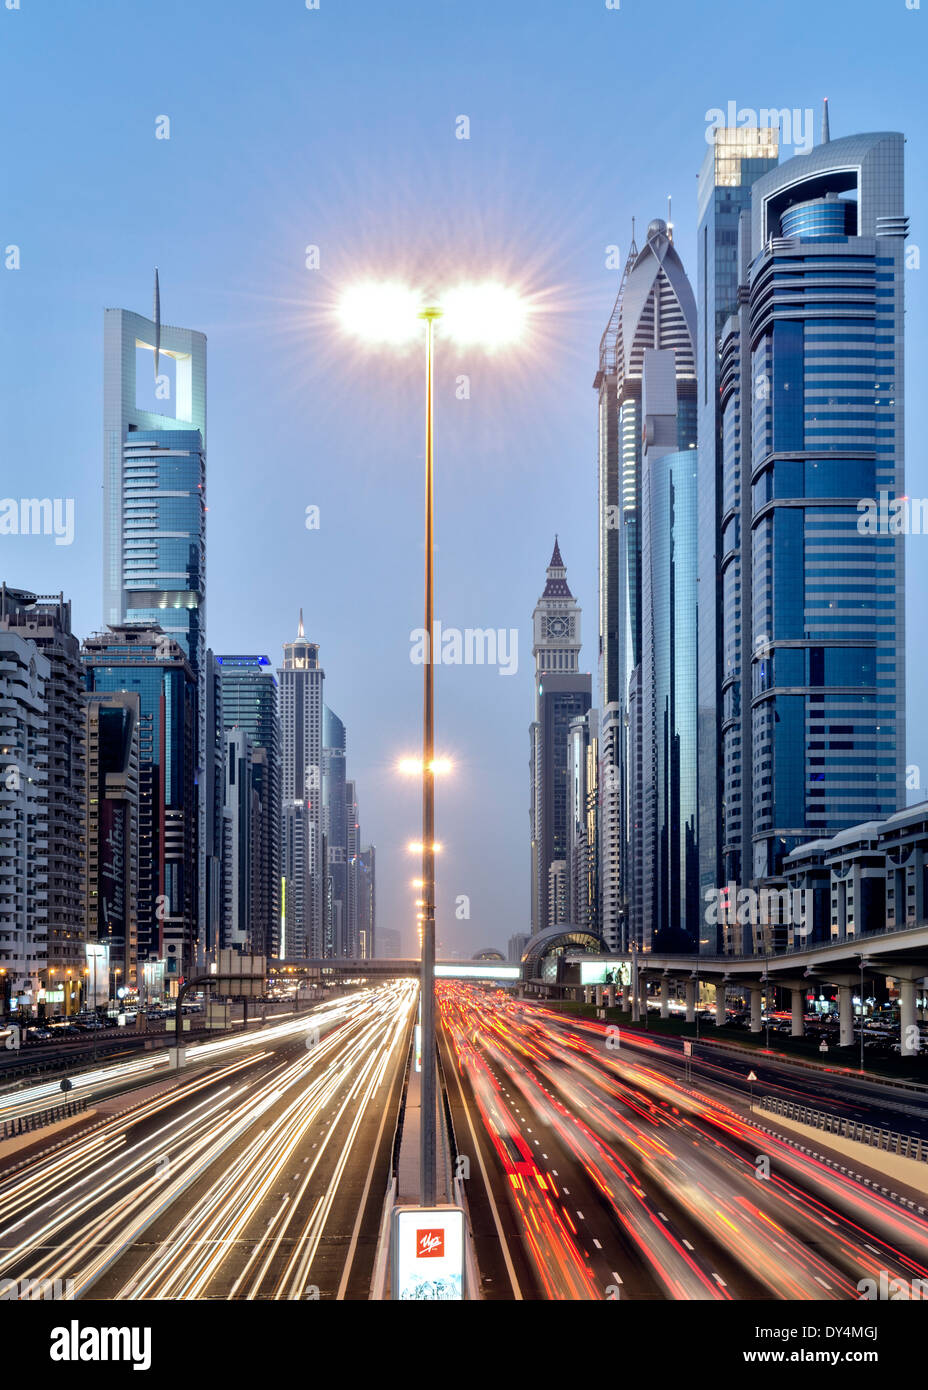 Dusk view of traffic and skyscrapers along Sheikh Zayed Road in Dubai United Arab Emirates Stock Photo